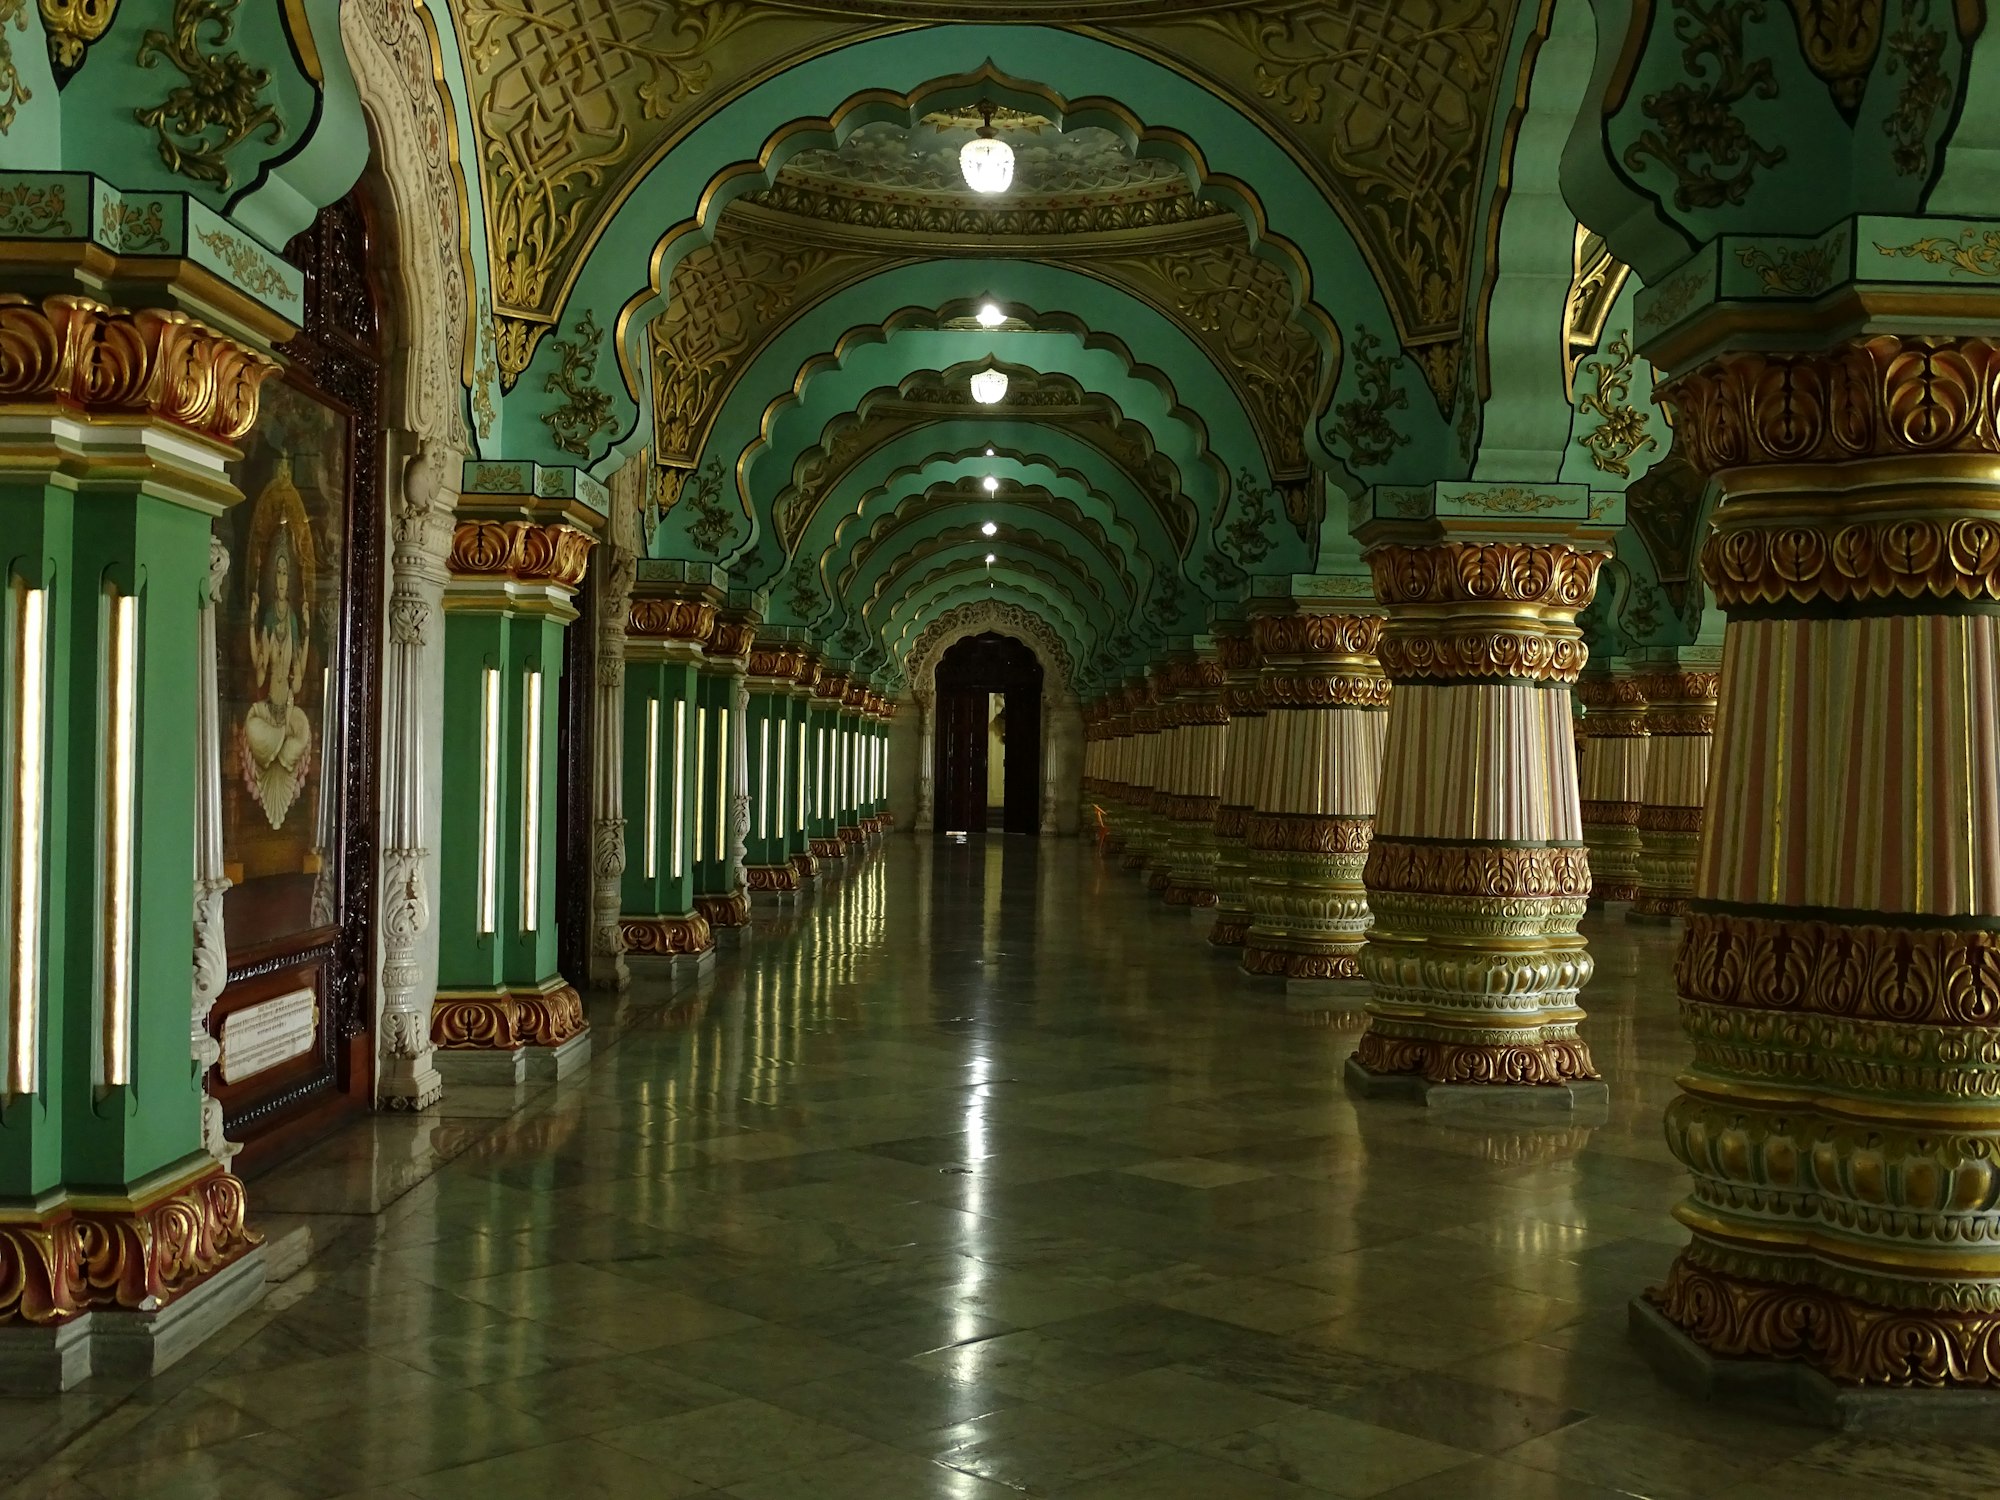 Mysore Palace is one of the most famous palace and heritage place to visit in India. It is decorated beautifully and lighten on "Dashera" festival in India.\r\nThis palace is famous for its interior and till the date it is well maintained. \uD83D\uDE03 \uD83D\uDE03\uD83D\uDE0A